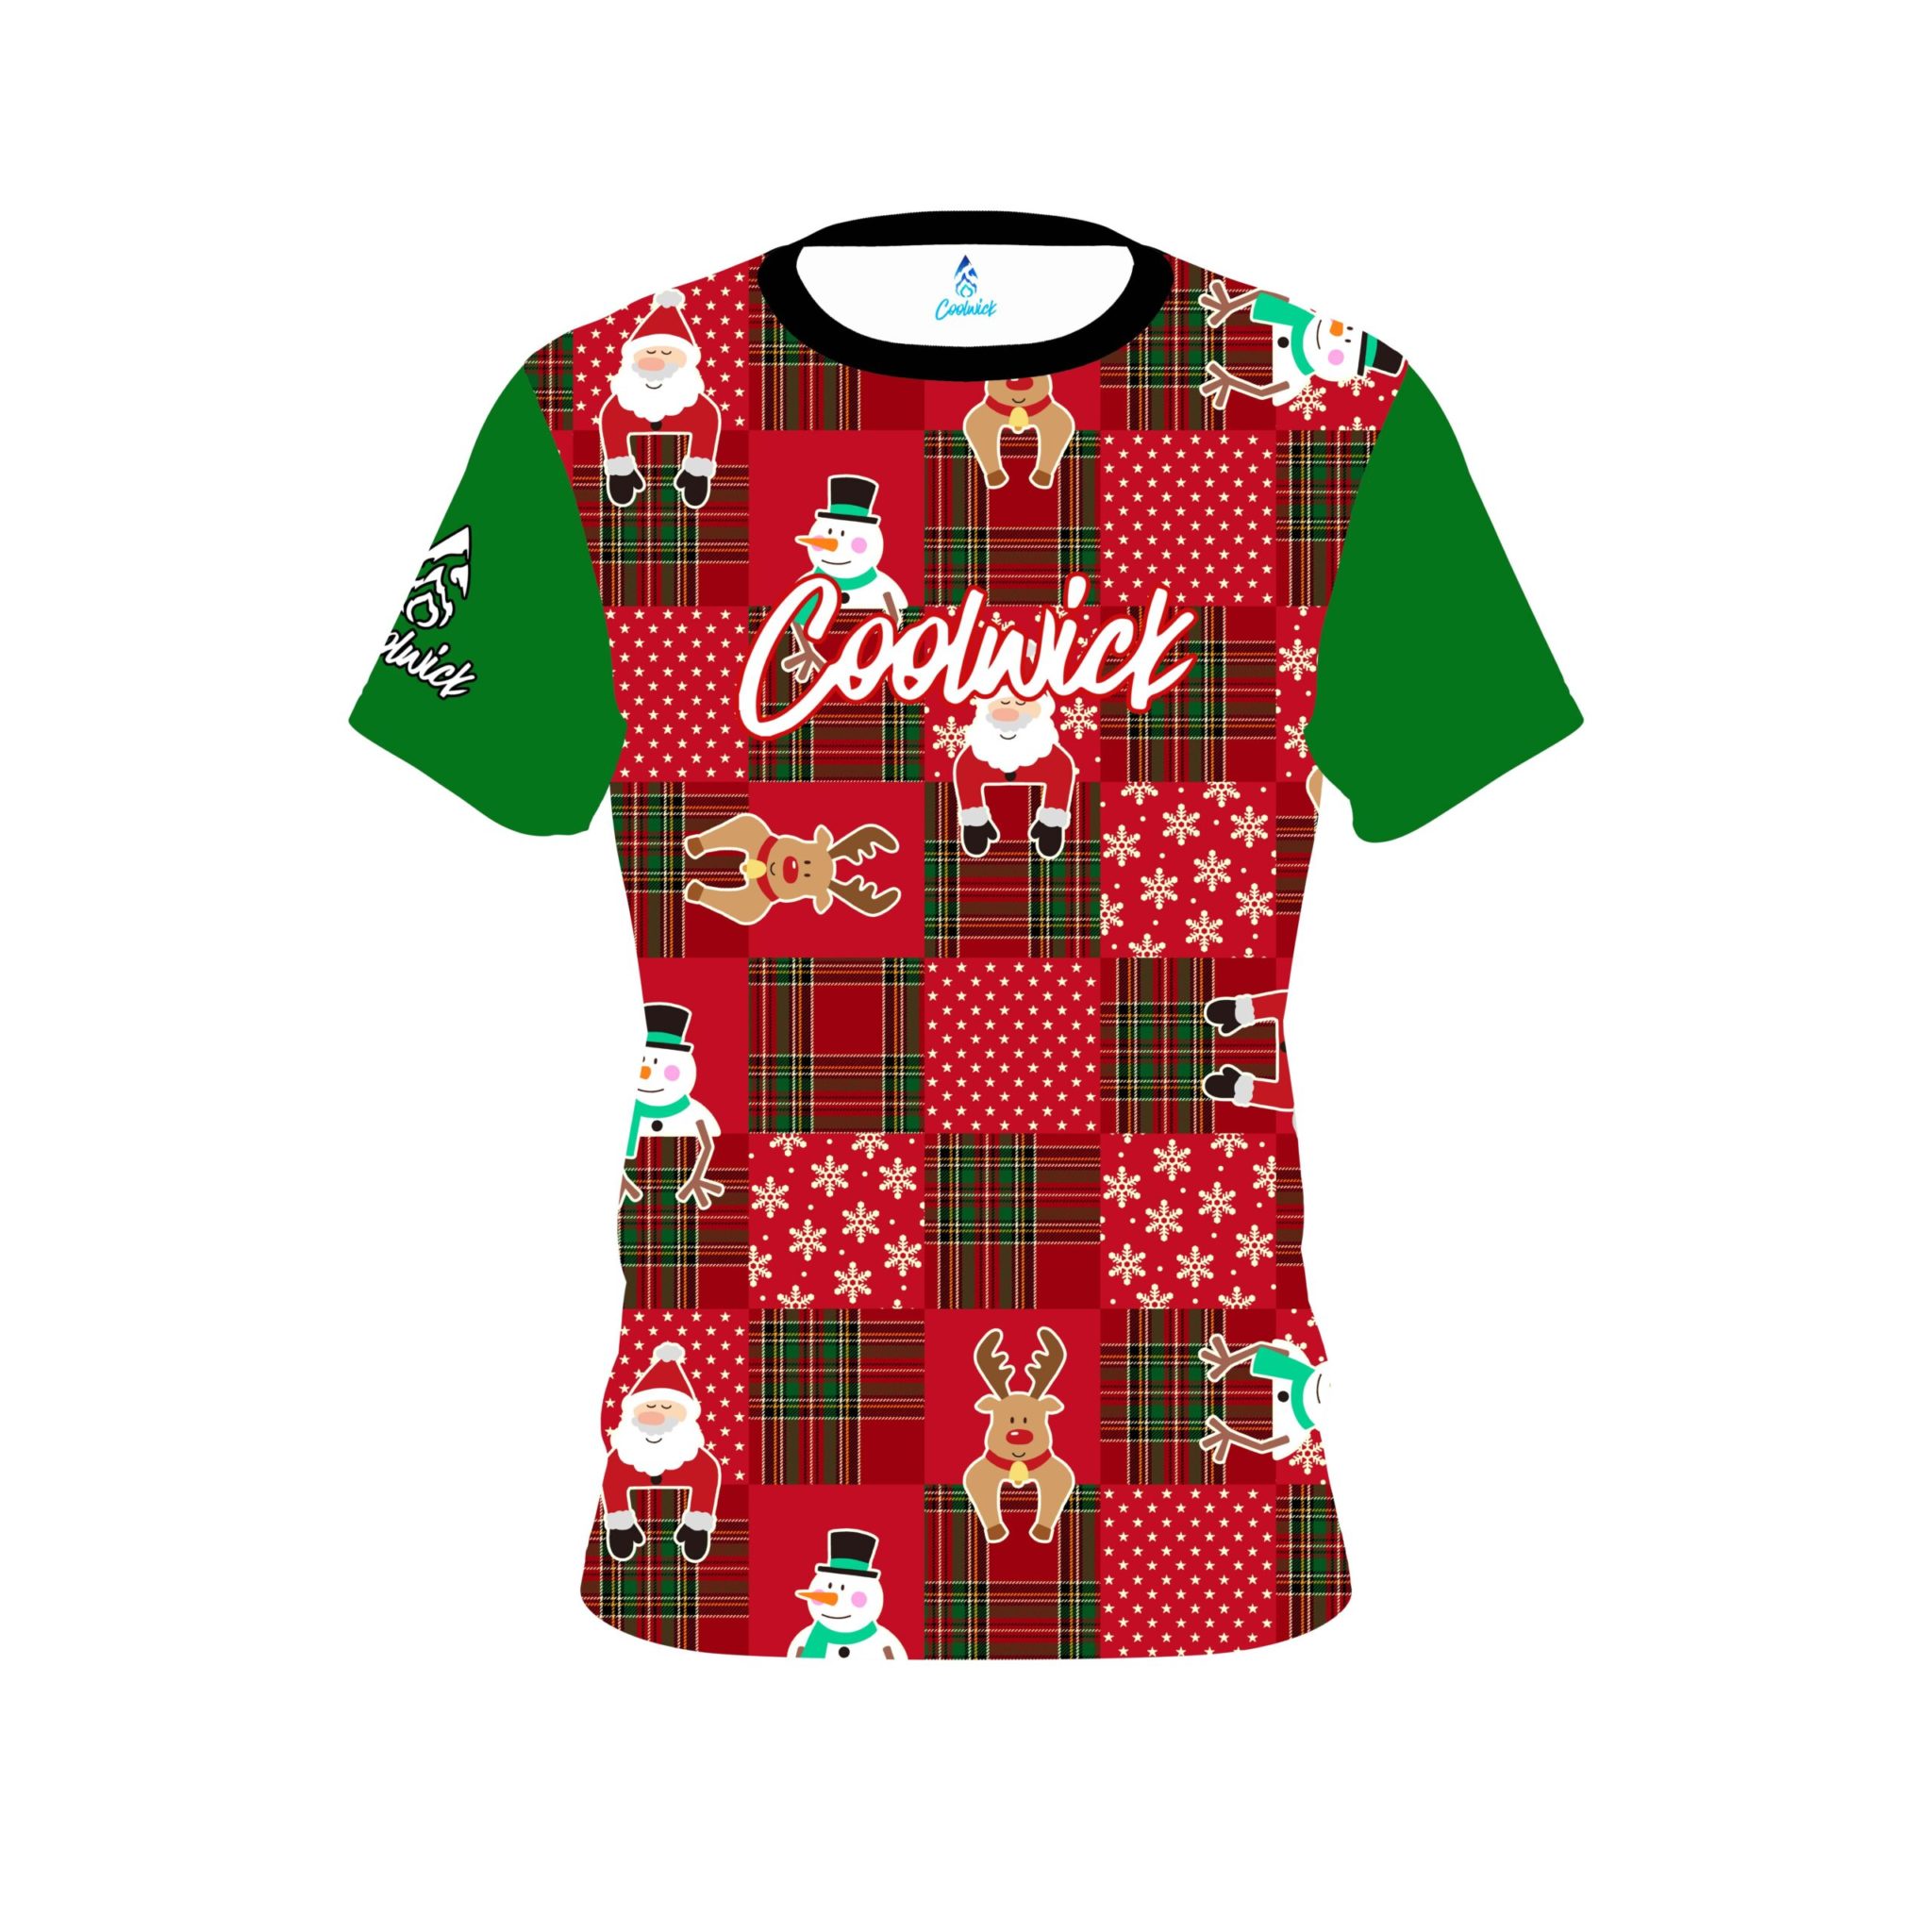 Signature Coolwick Ugly Sweater Christmas Quilt Holiday Time Bowling Jersey